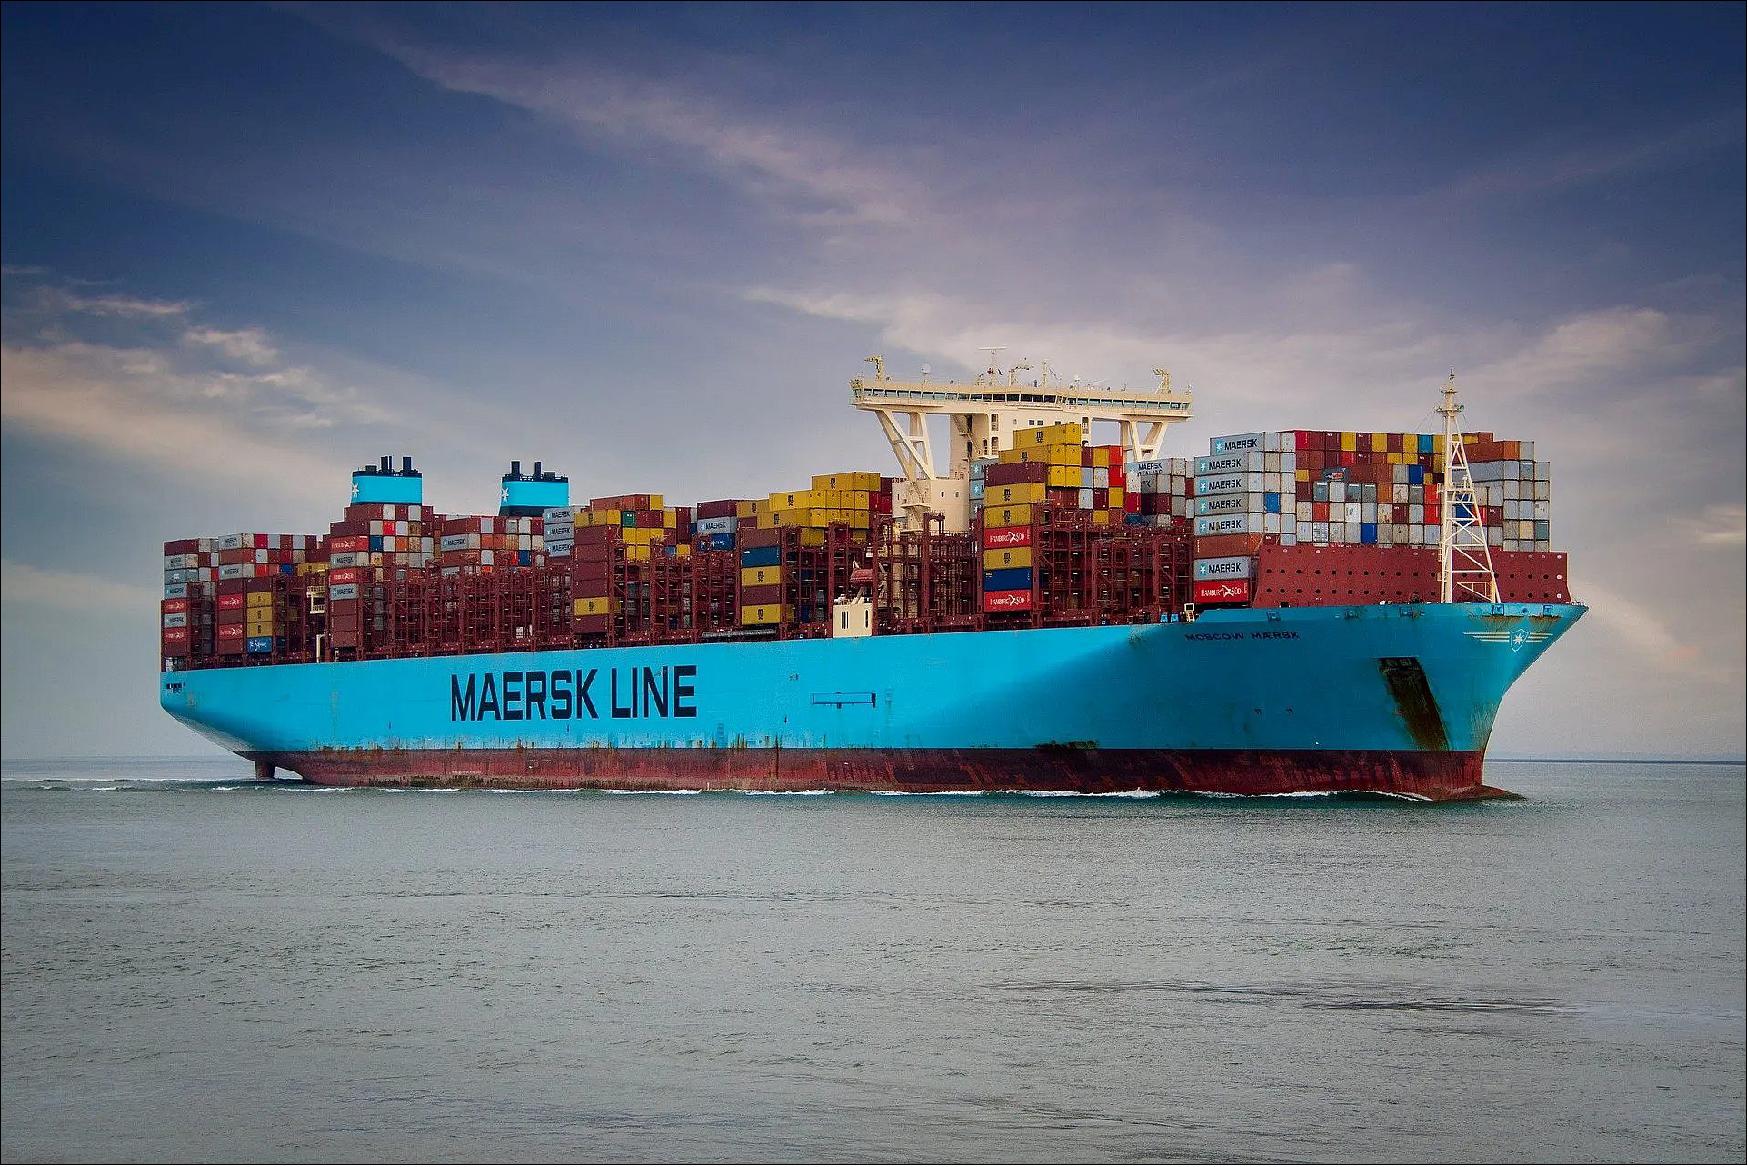 Figure 143: Maersk is one of the many companies that has signed the Call to Action for Shipping Decarbonisation (image credit: VPO)